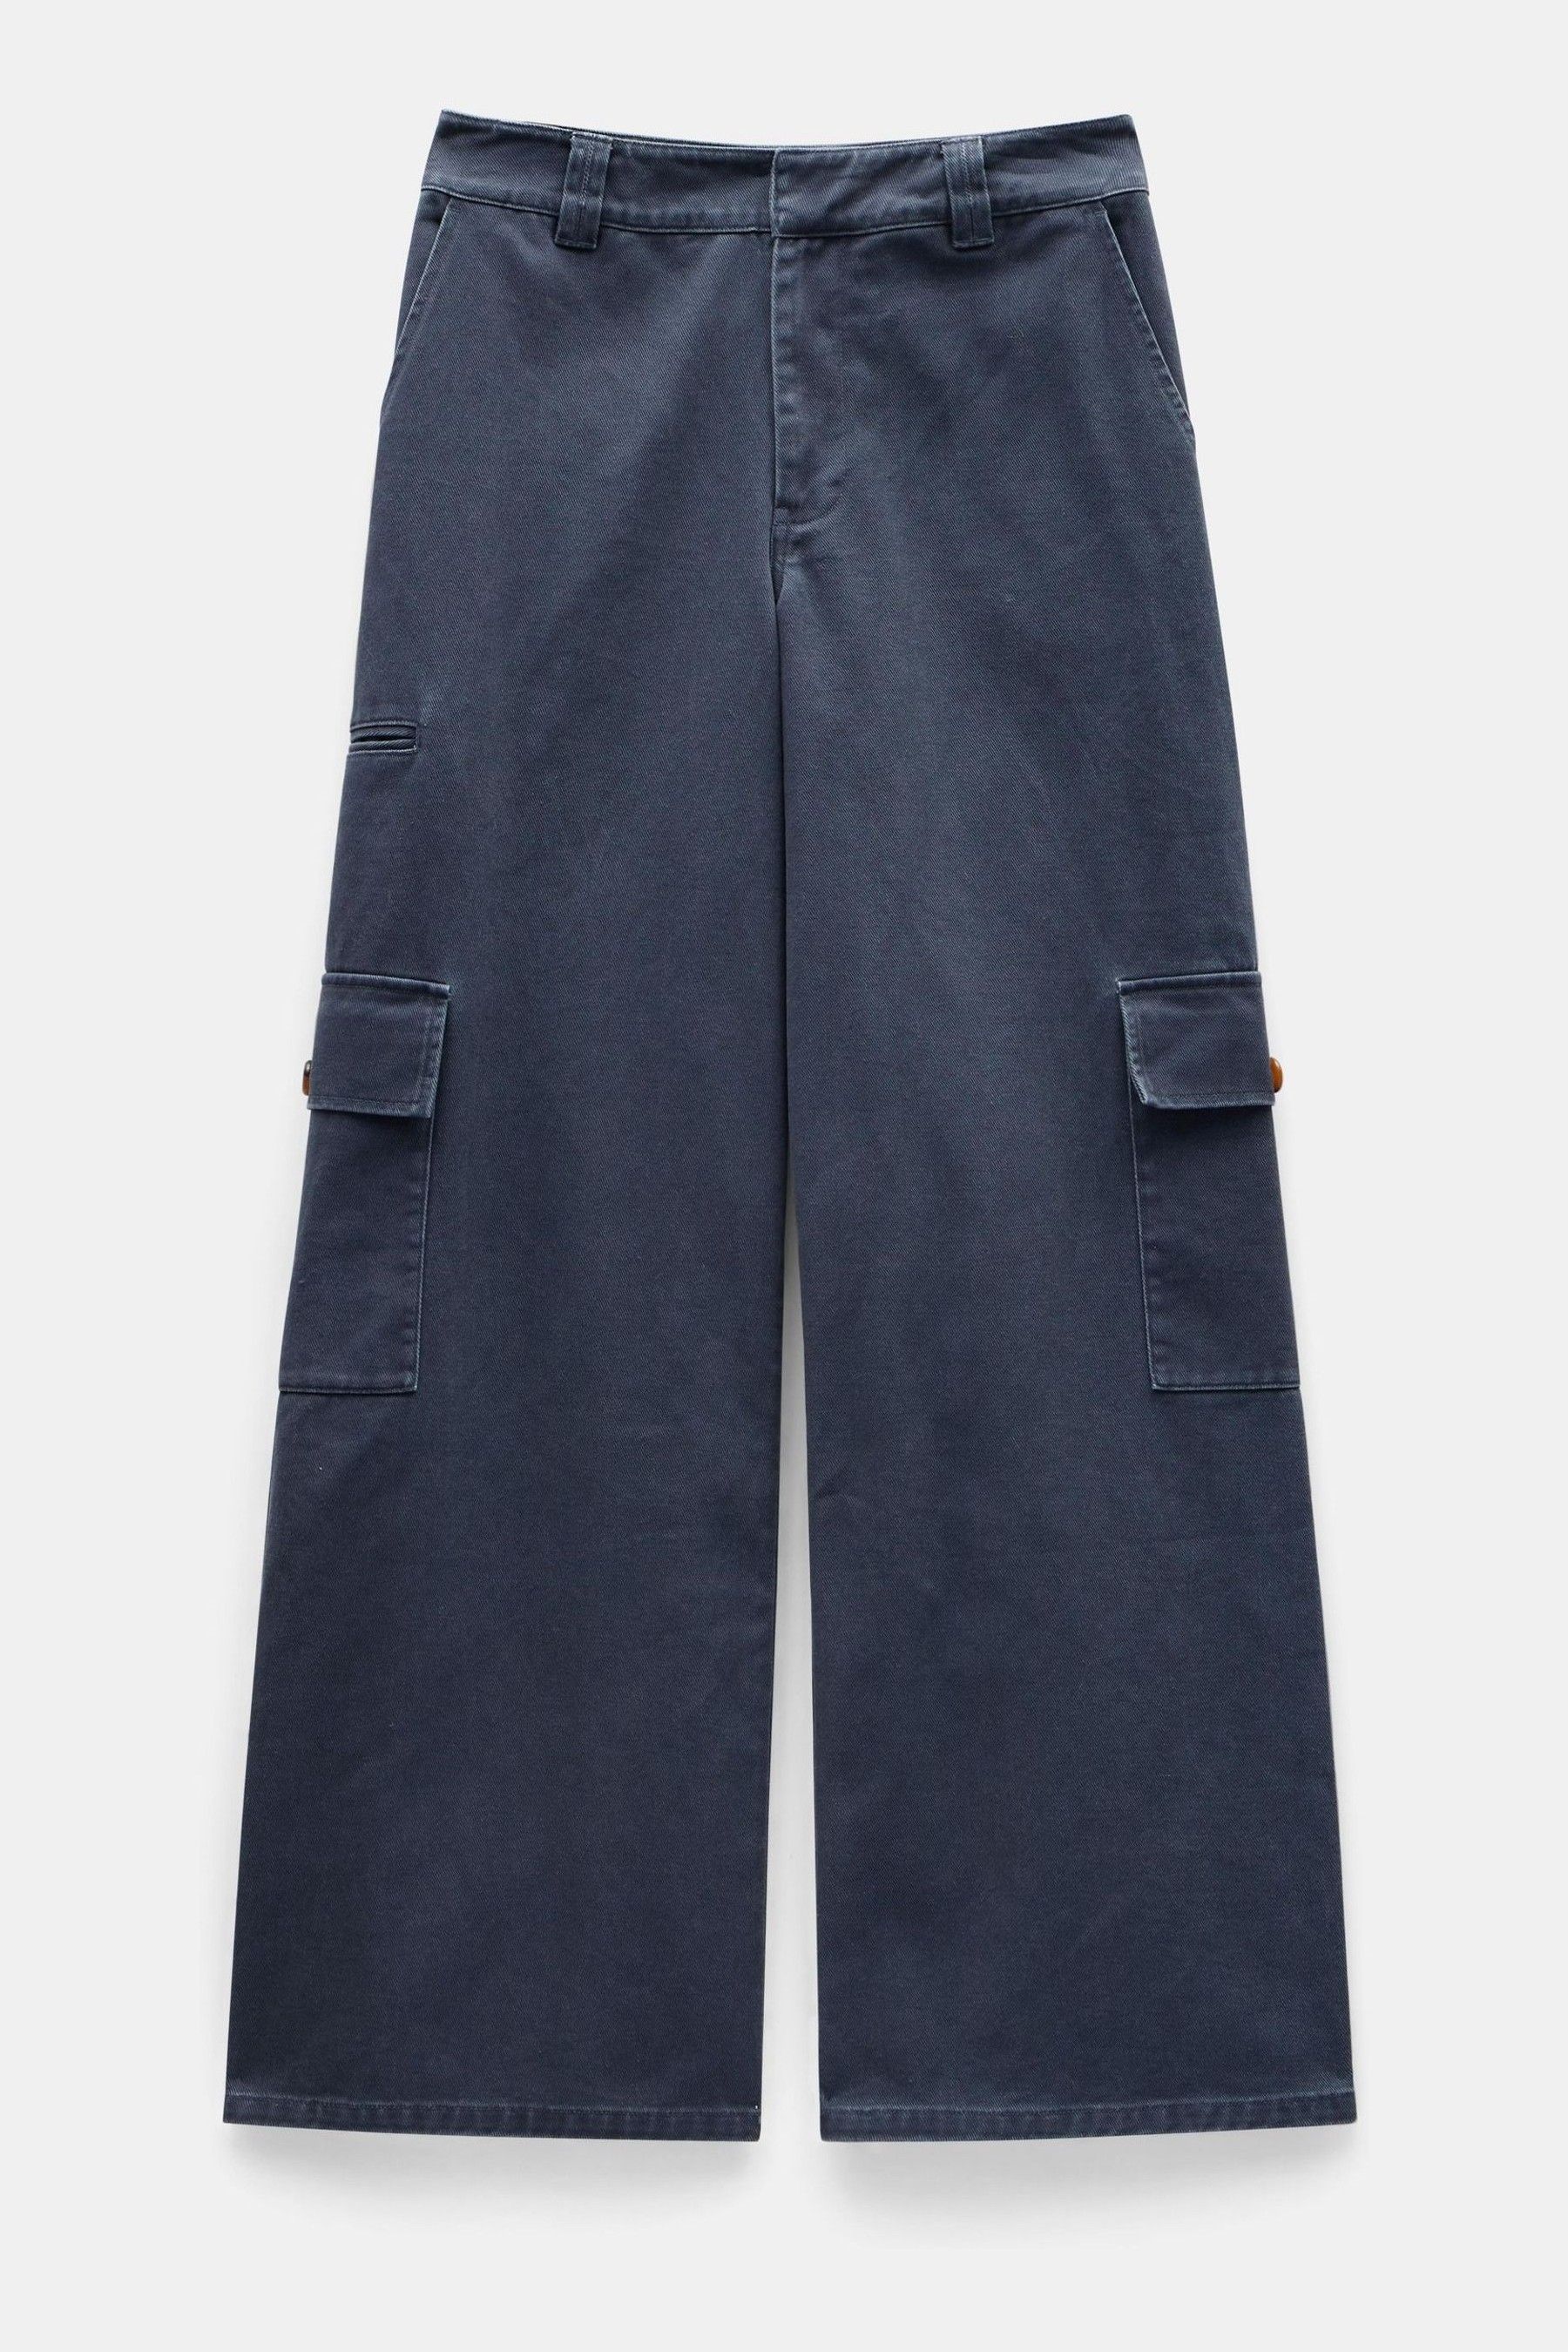 Buy Hush Grey Jess Wide Leg Cargo Trousers from the Next UK online shop